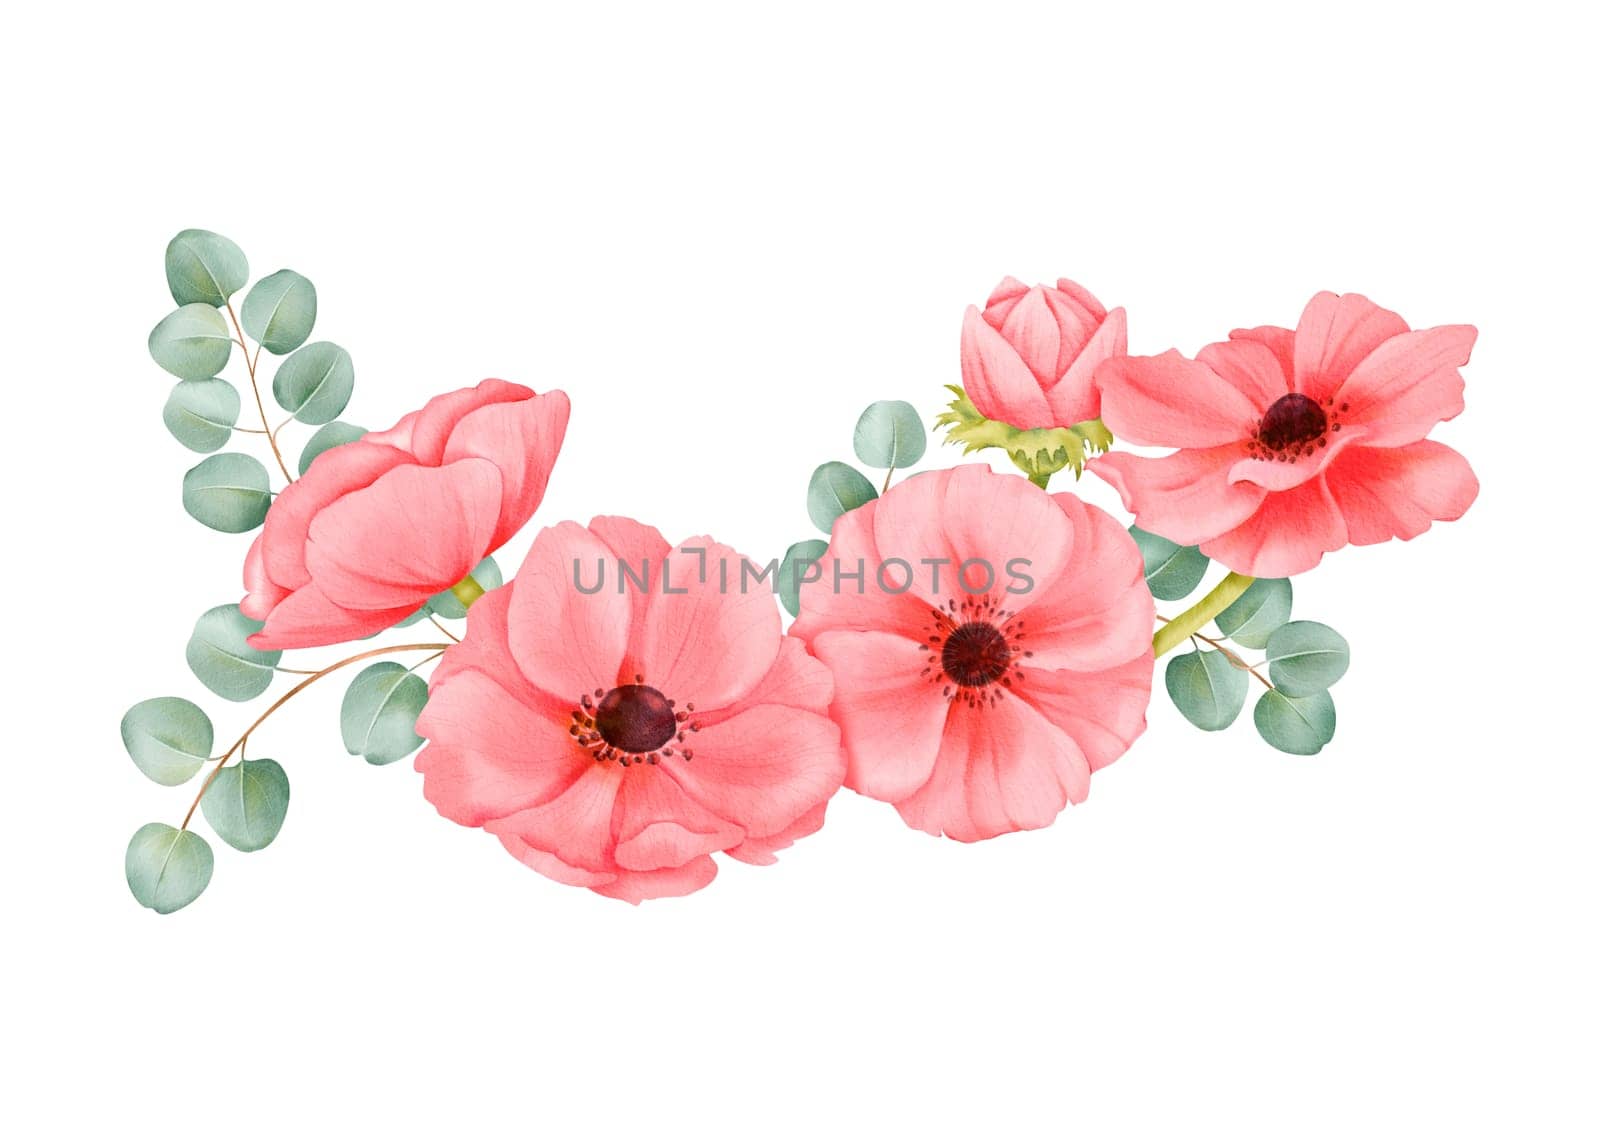 A watercolor composition pink anemone flowers, fresh greenery, and eucalyptus leaves. for wedding stationery, event invitations, botanical-themed designs, digital backgrounds, art prints and interior by Art_Mari_Ka